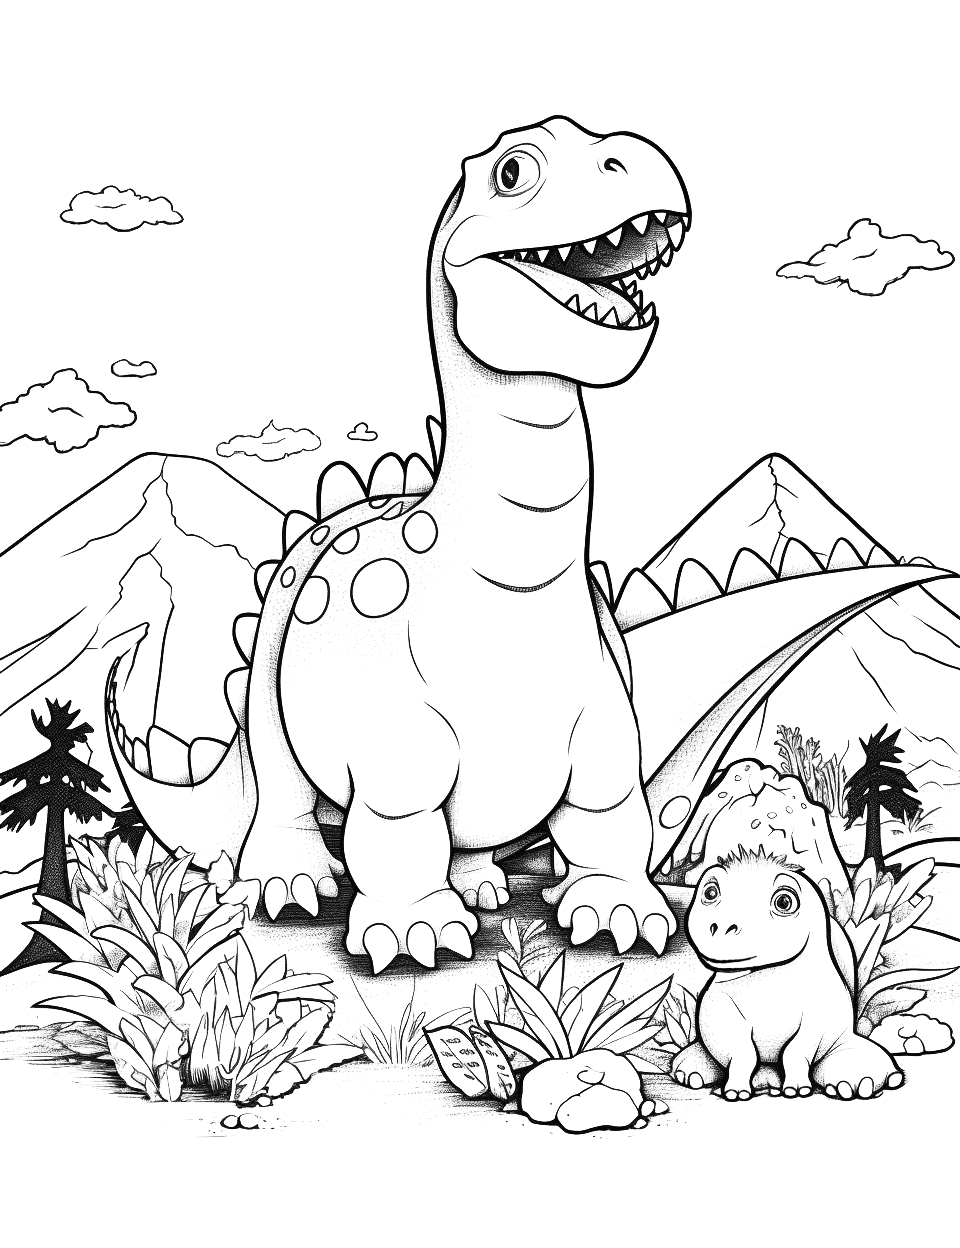 Camp Cretaceous Fun Coloring Page - A scene from Camp Cretaceous, featuring the campers and their dinosaur friends.